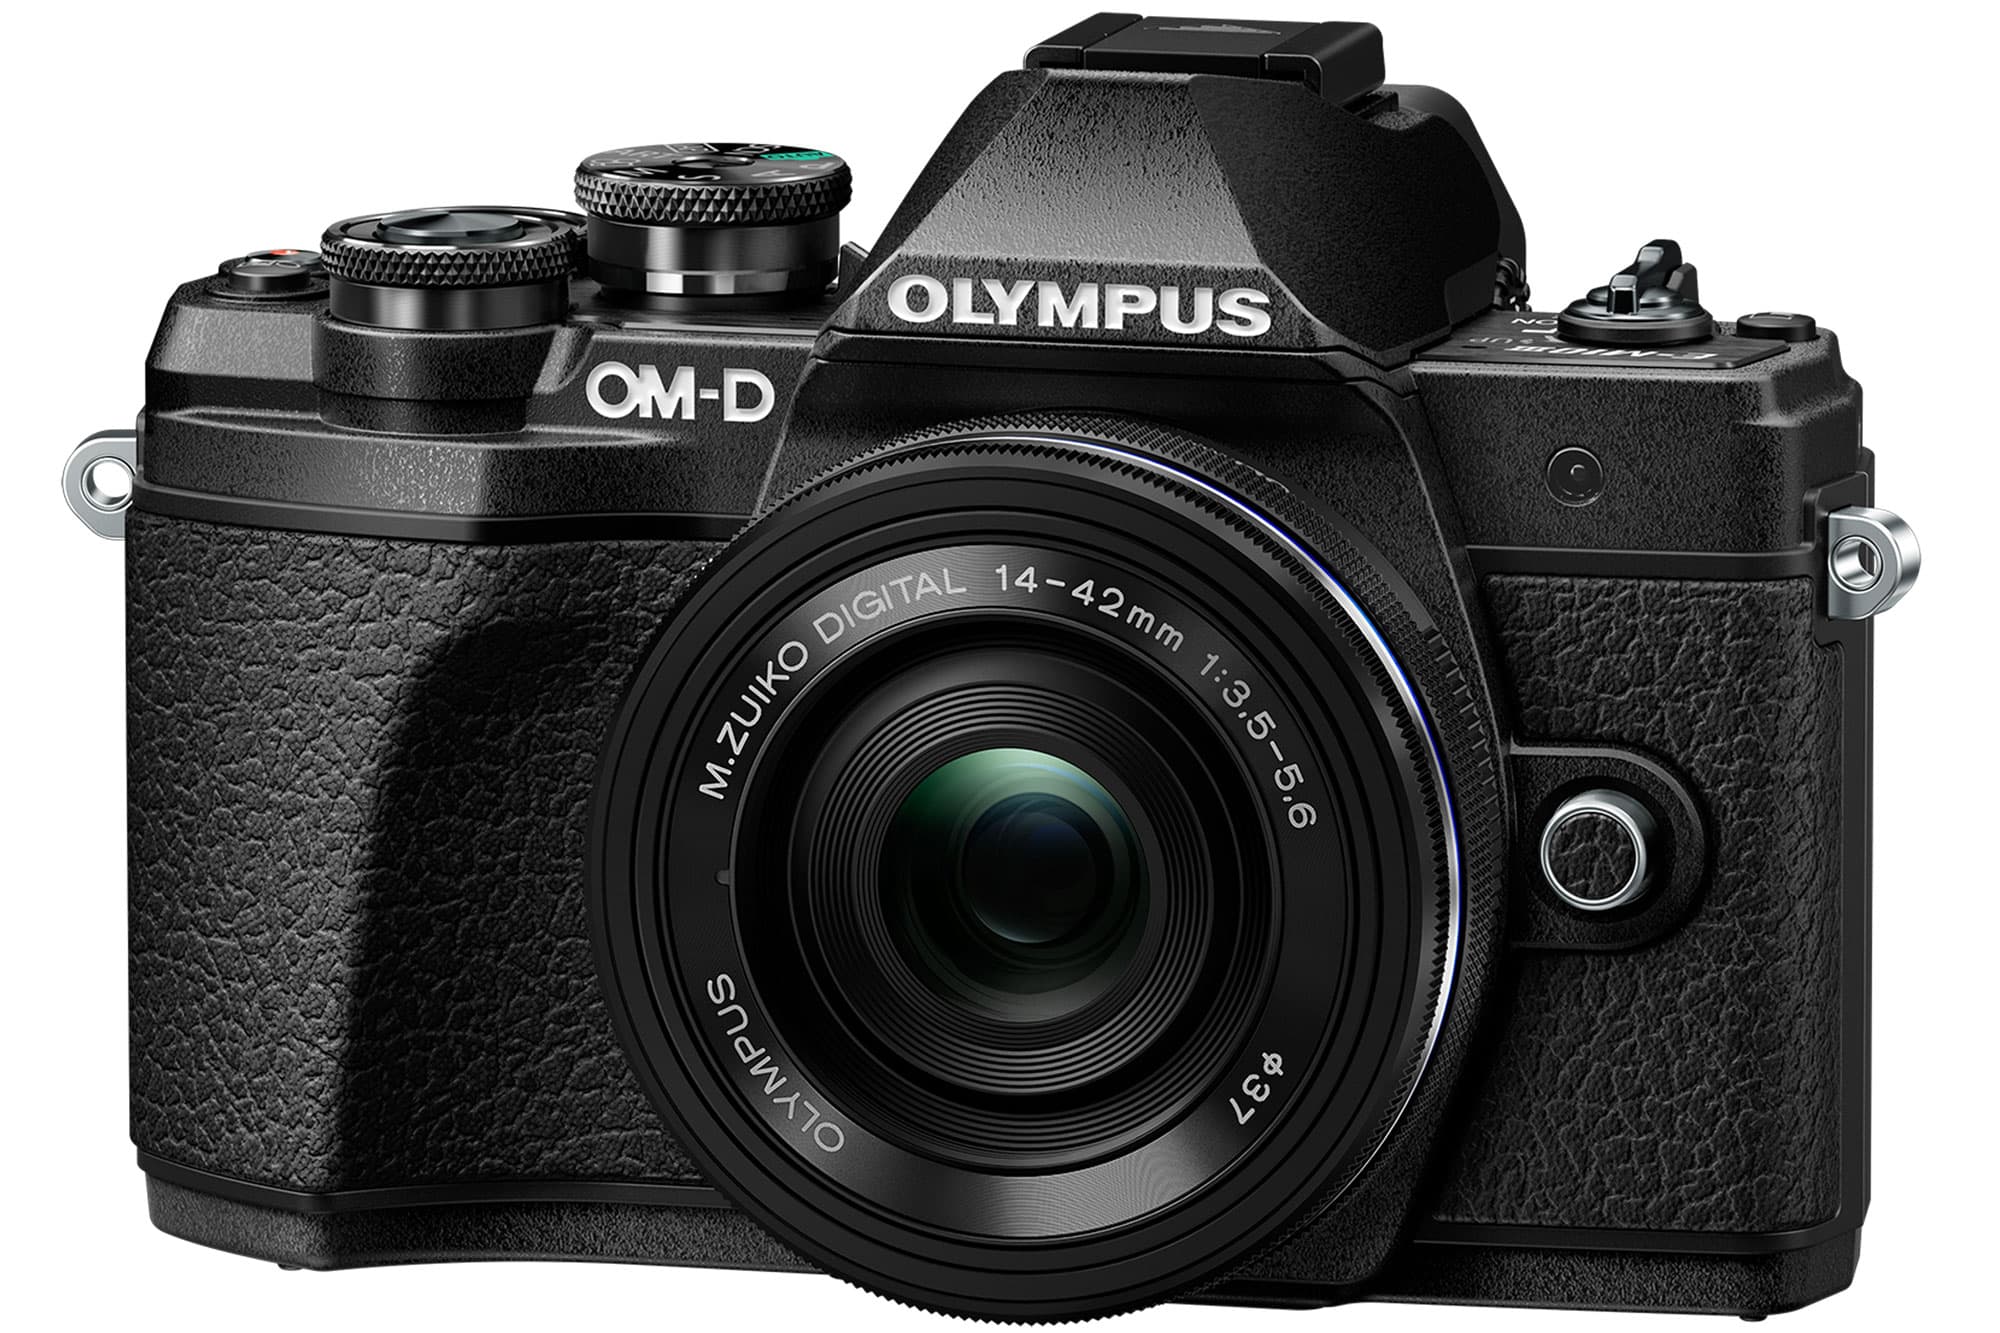 Raad erts Overjas Olympus OM-D E-M10 Mark III - a strong offering for advanced beginners